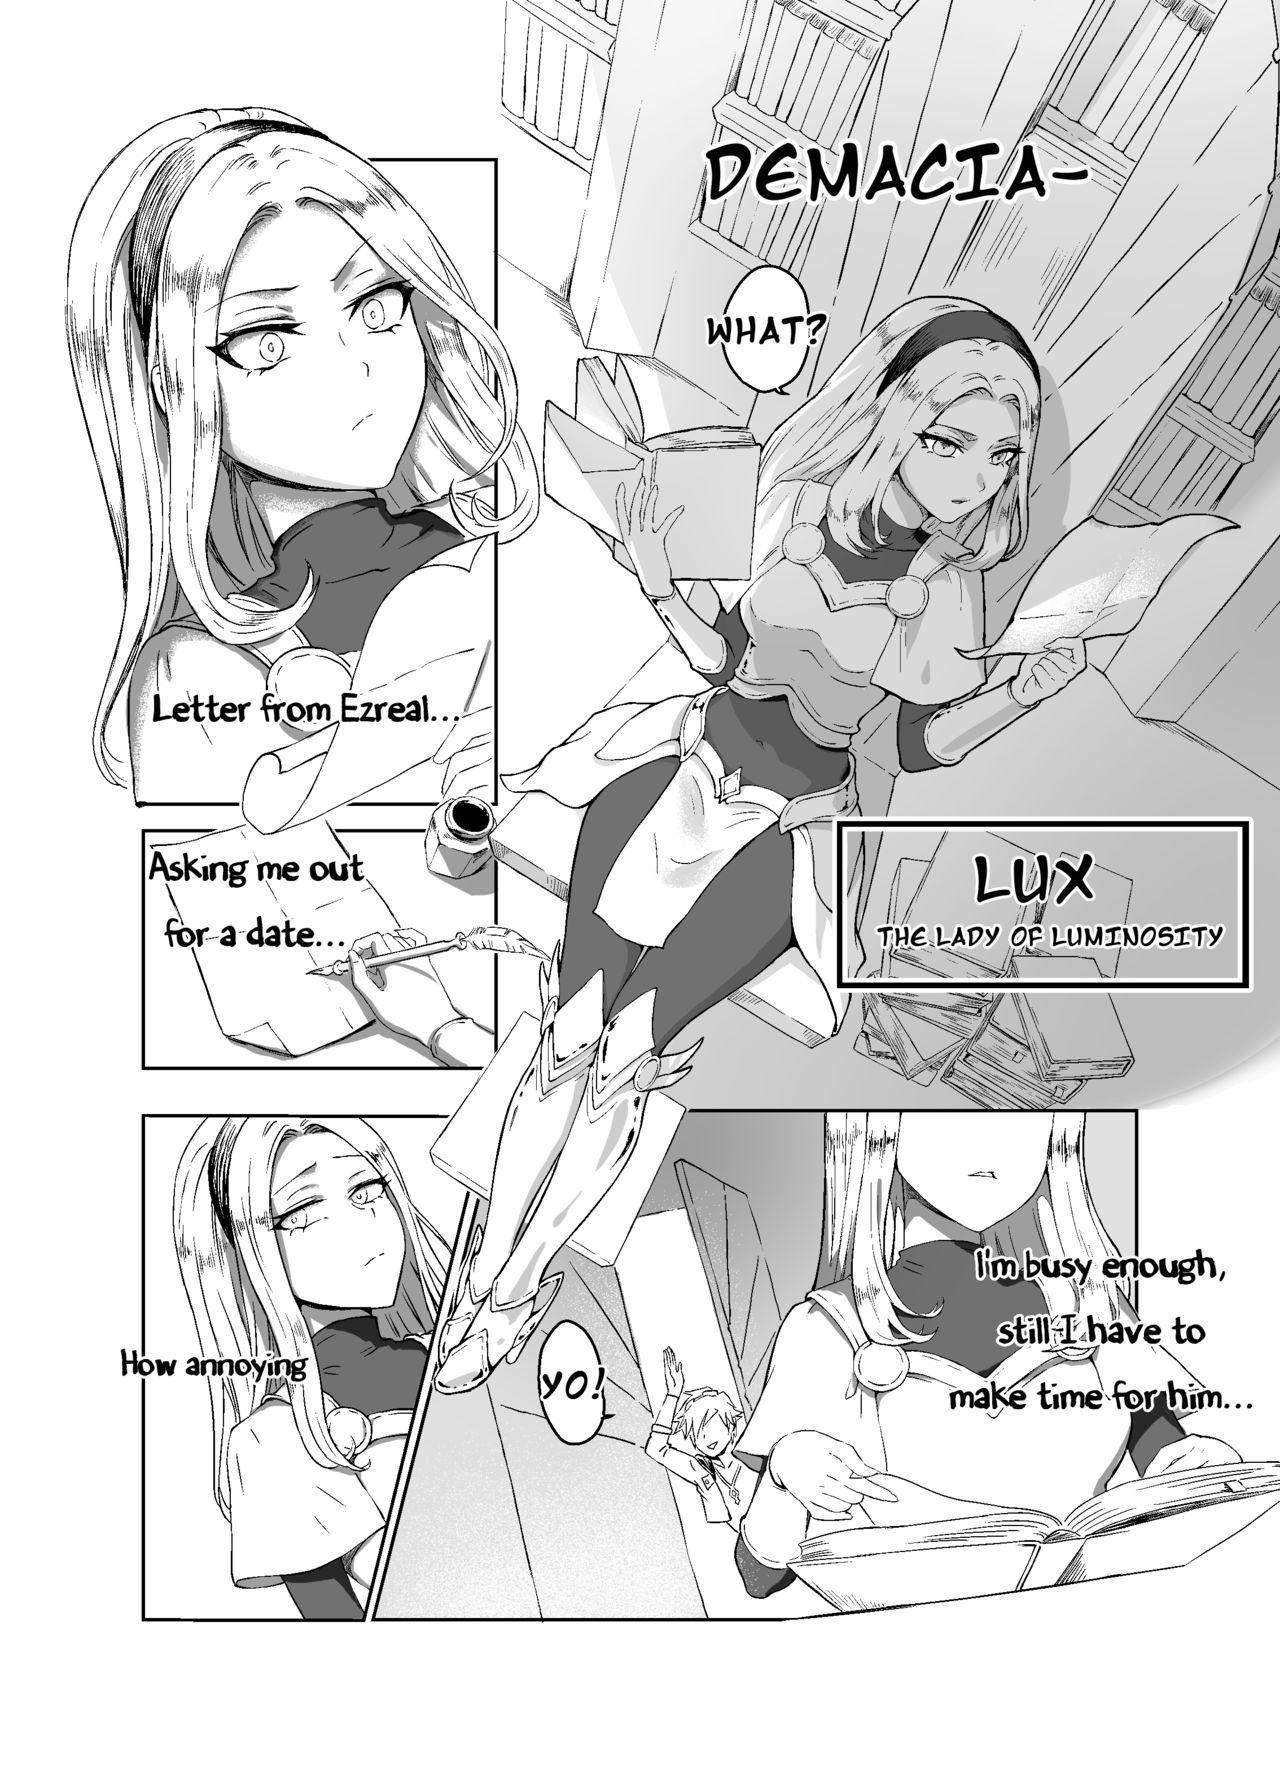 Tease Lux x Viego ft. Ezreal - League of legends Milfporn - Page 2